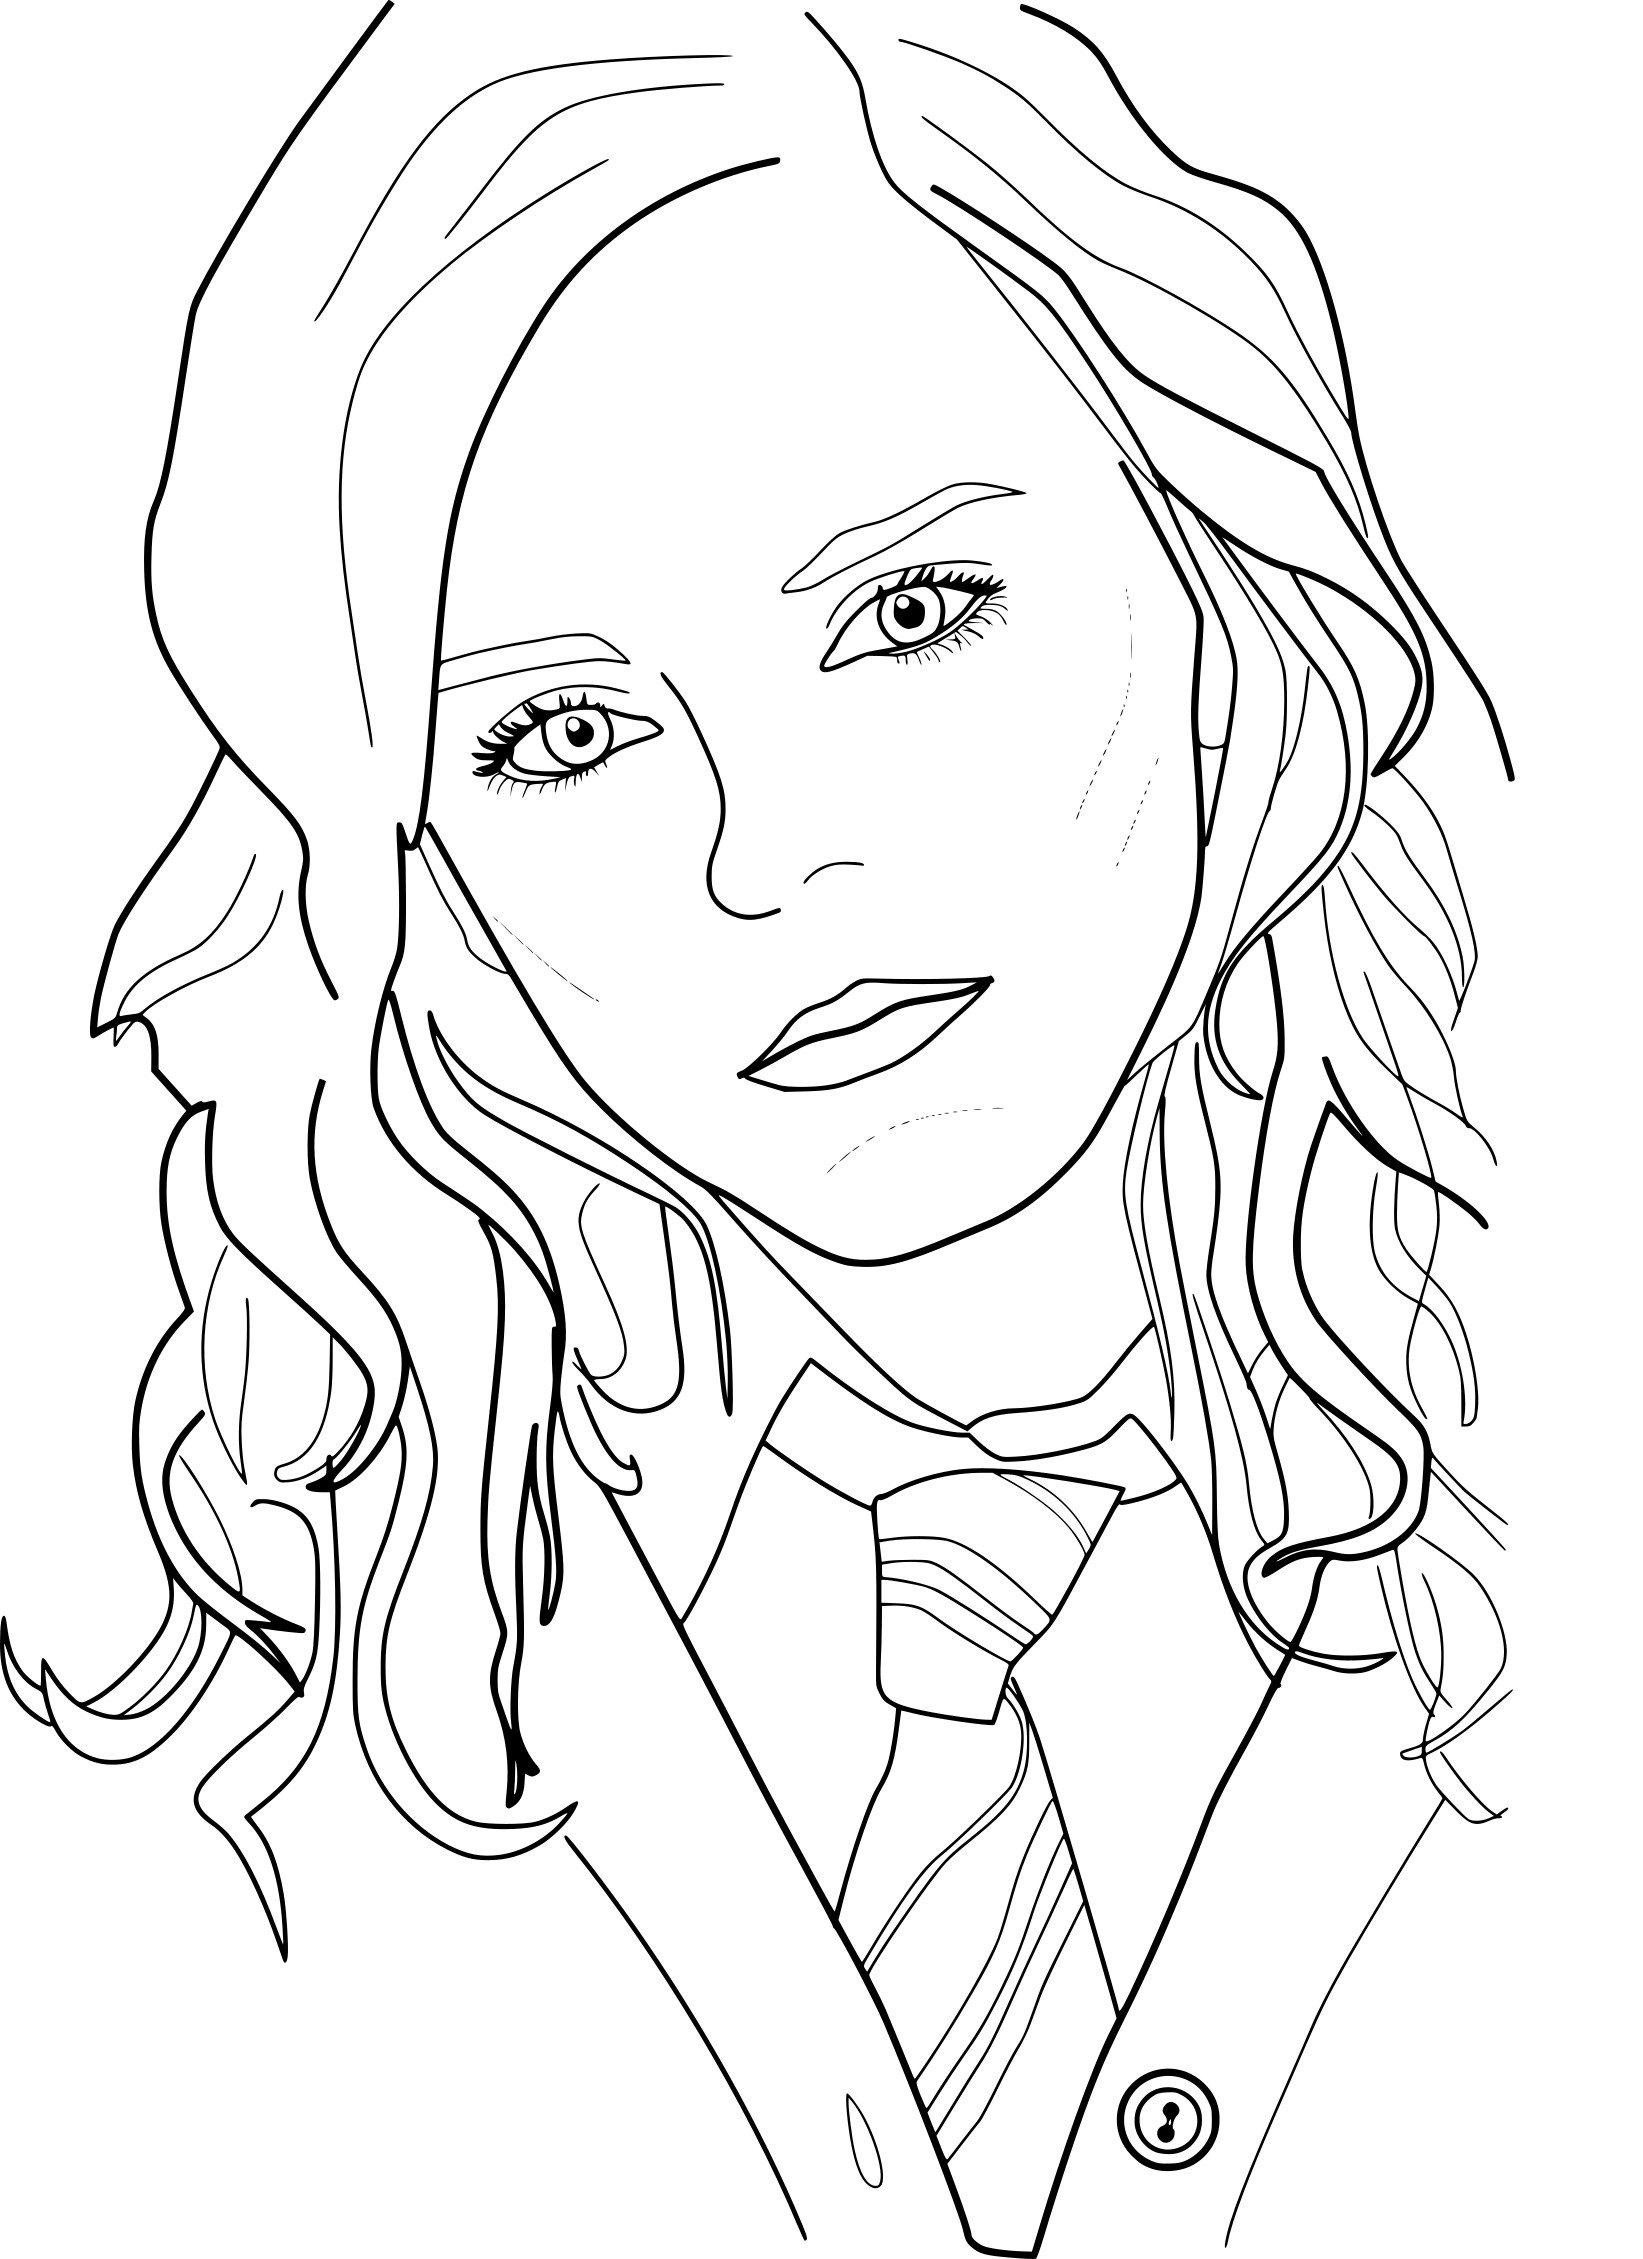 Harry Potter Coloring Pages Hermione at GetColoringscom